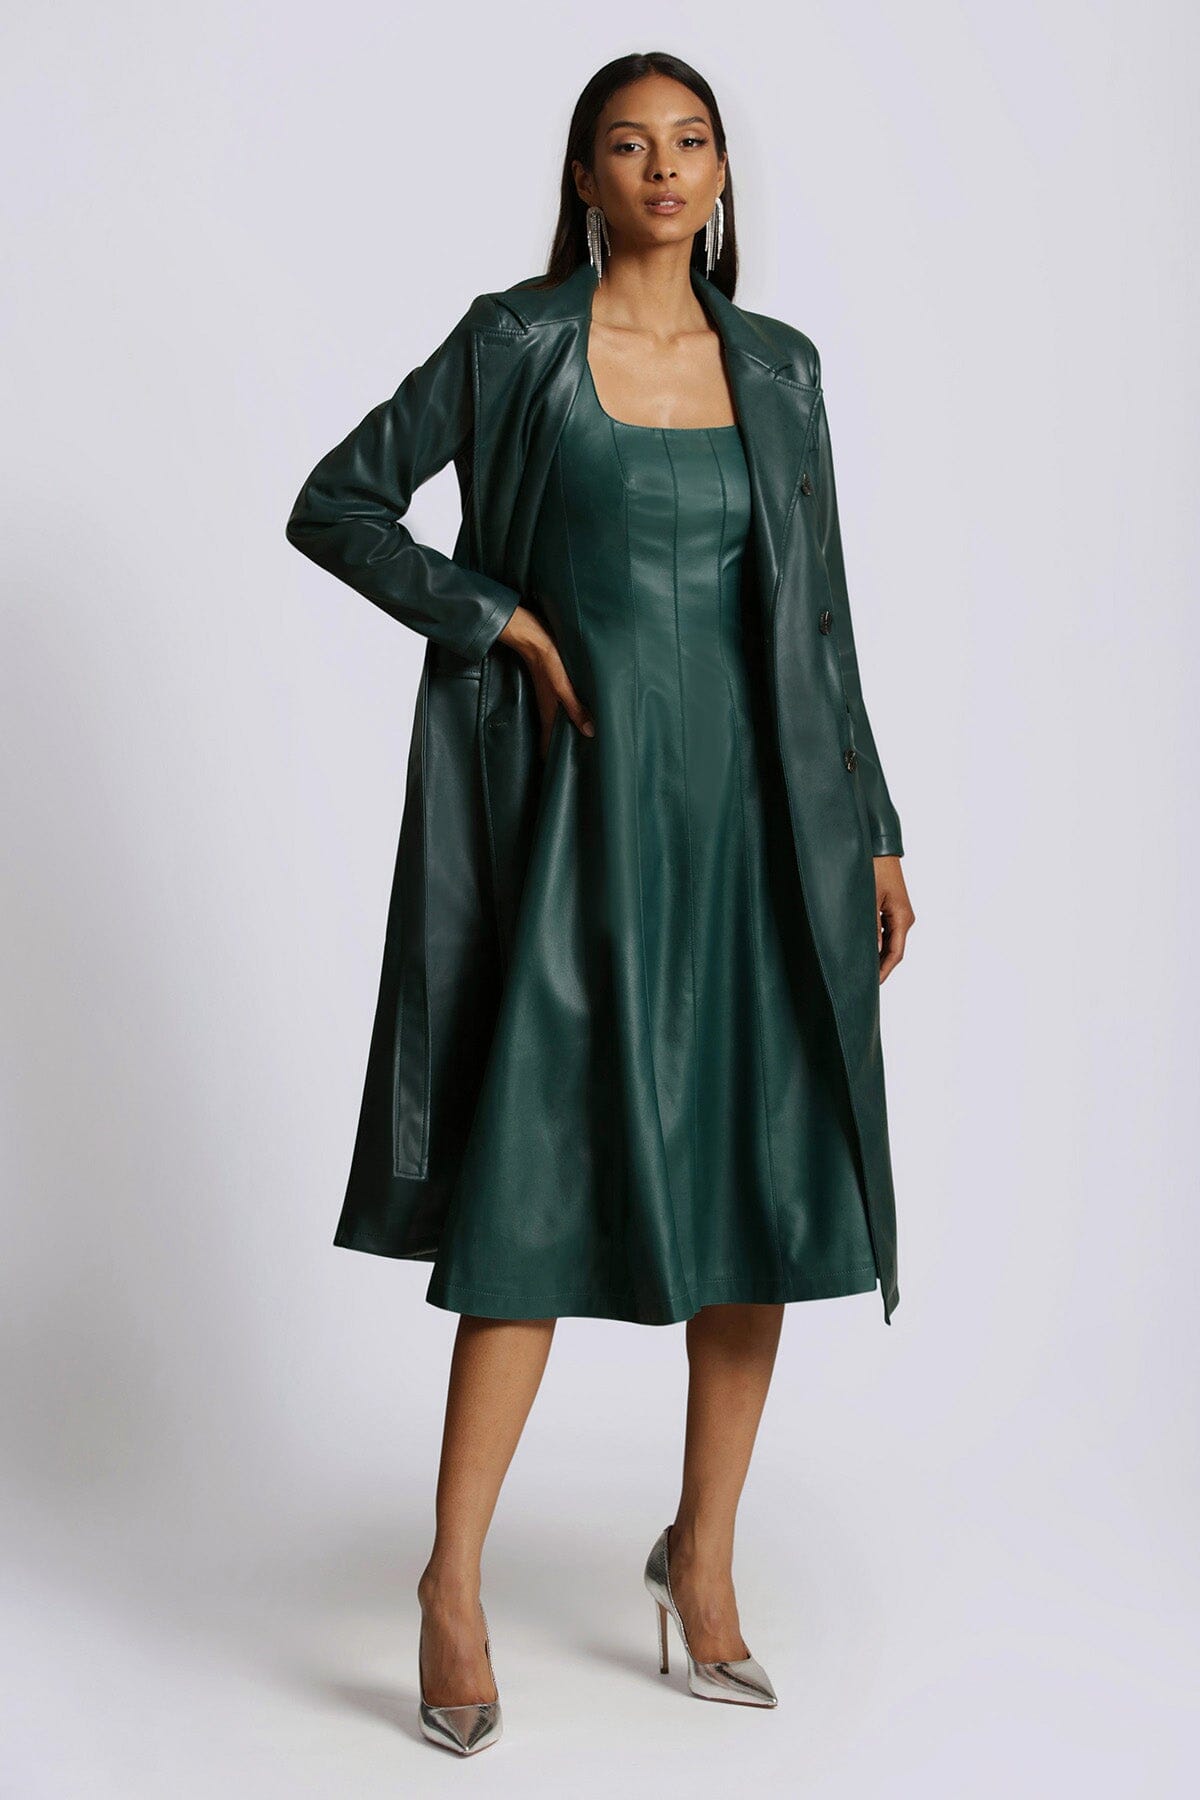 faux ever leather fit and flare midi dress pine green - figure flattering designer fashion date night dresses for women